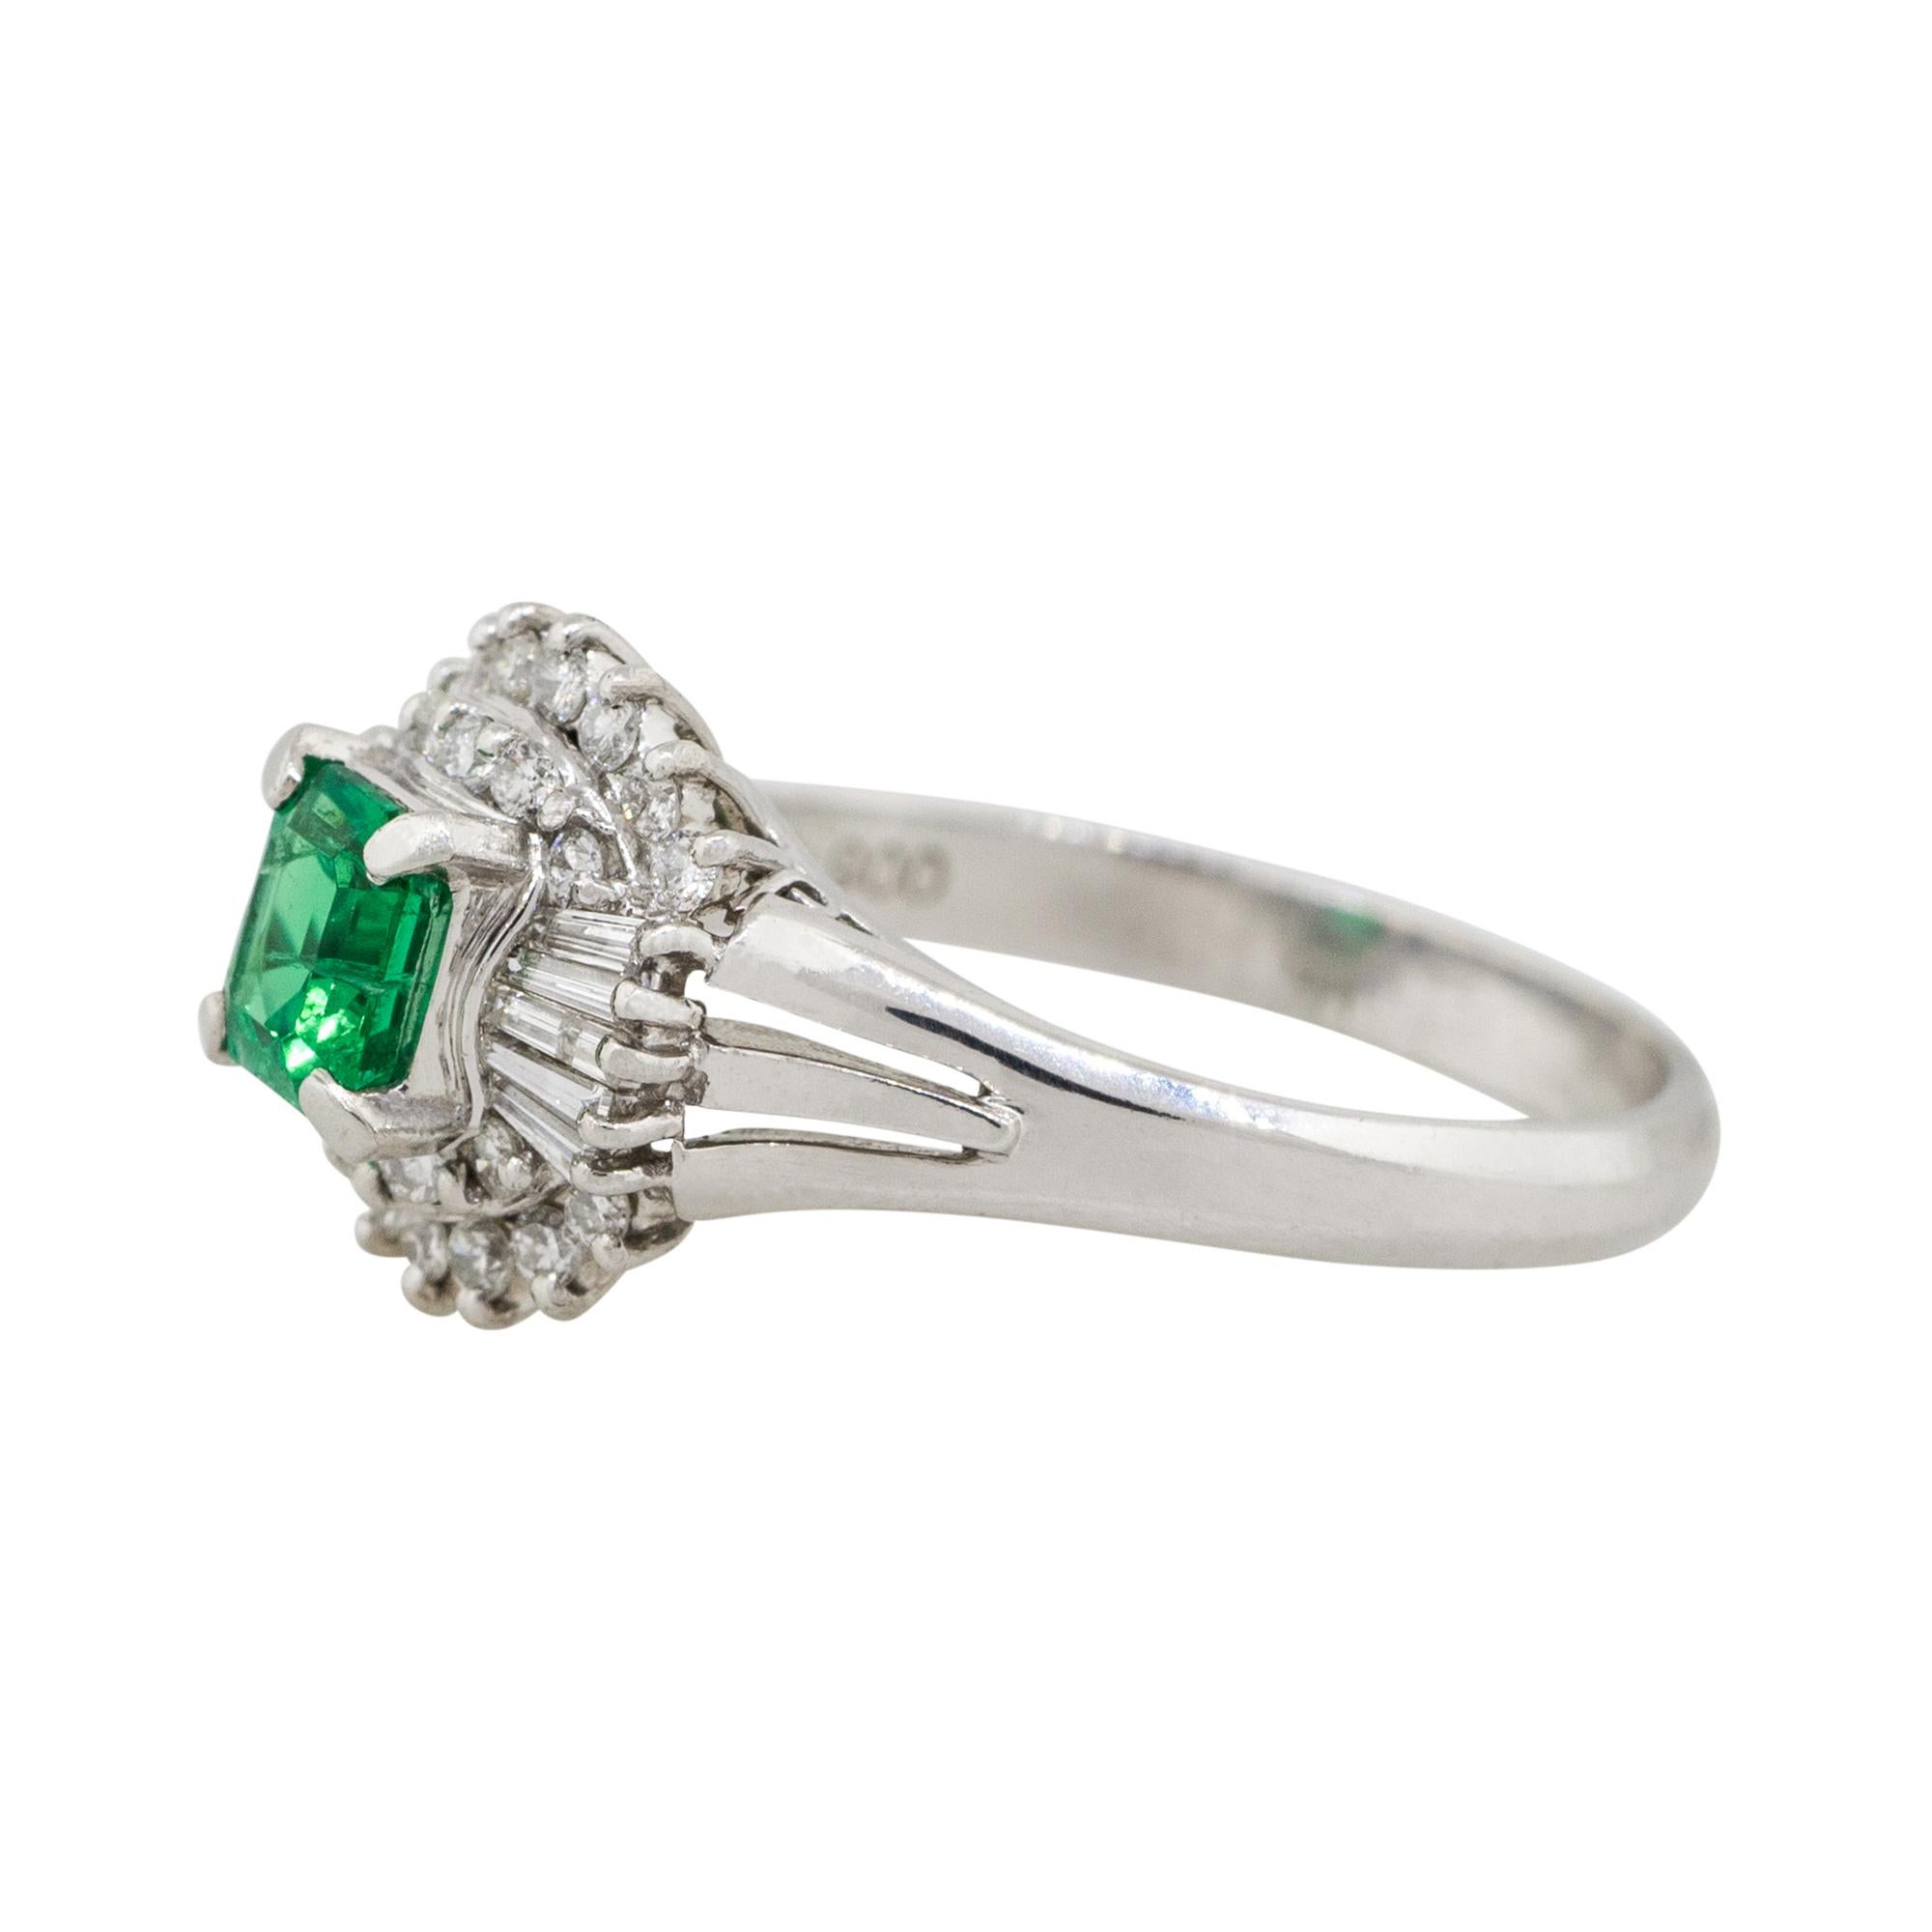 Material: Platinum
Center Gemstone Details: Approx. 0.47ctw square Emerald center gemstone
Diamond Details: Approx. 0.35ctw of round and baguette cut Diamonds. Diamonds are G.H in color and VS in clarity
Size: 6
Total weight: 4.6g (3.0dwt)